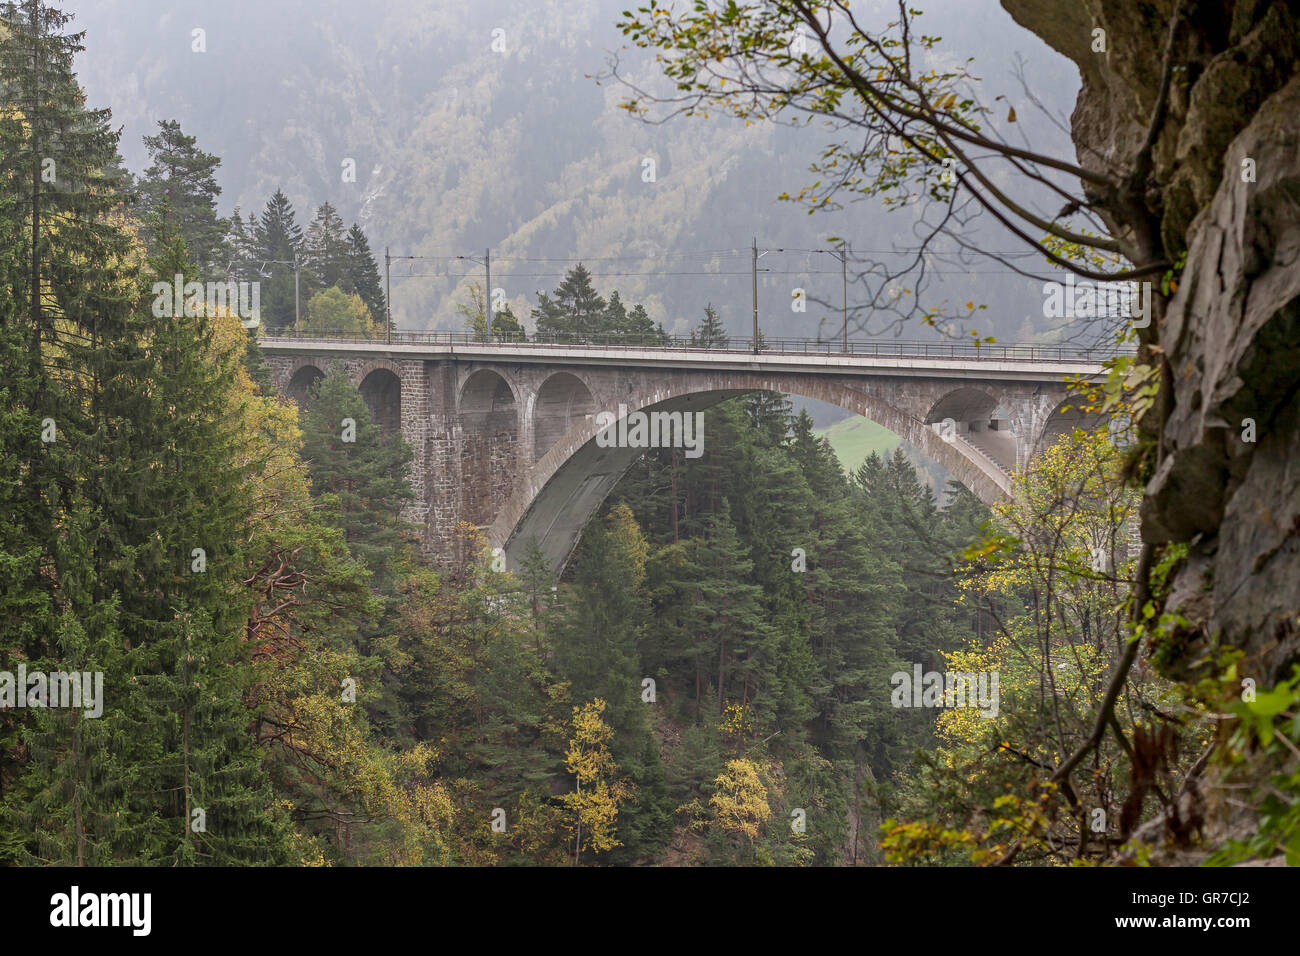 Over Numerous Bridges And Tunnels The The Gotthard Railway Overcomes The Main Ridge Of The Swiss Alps Stock Photo